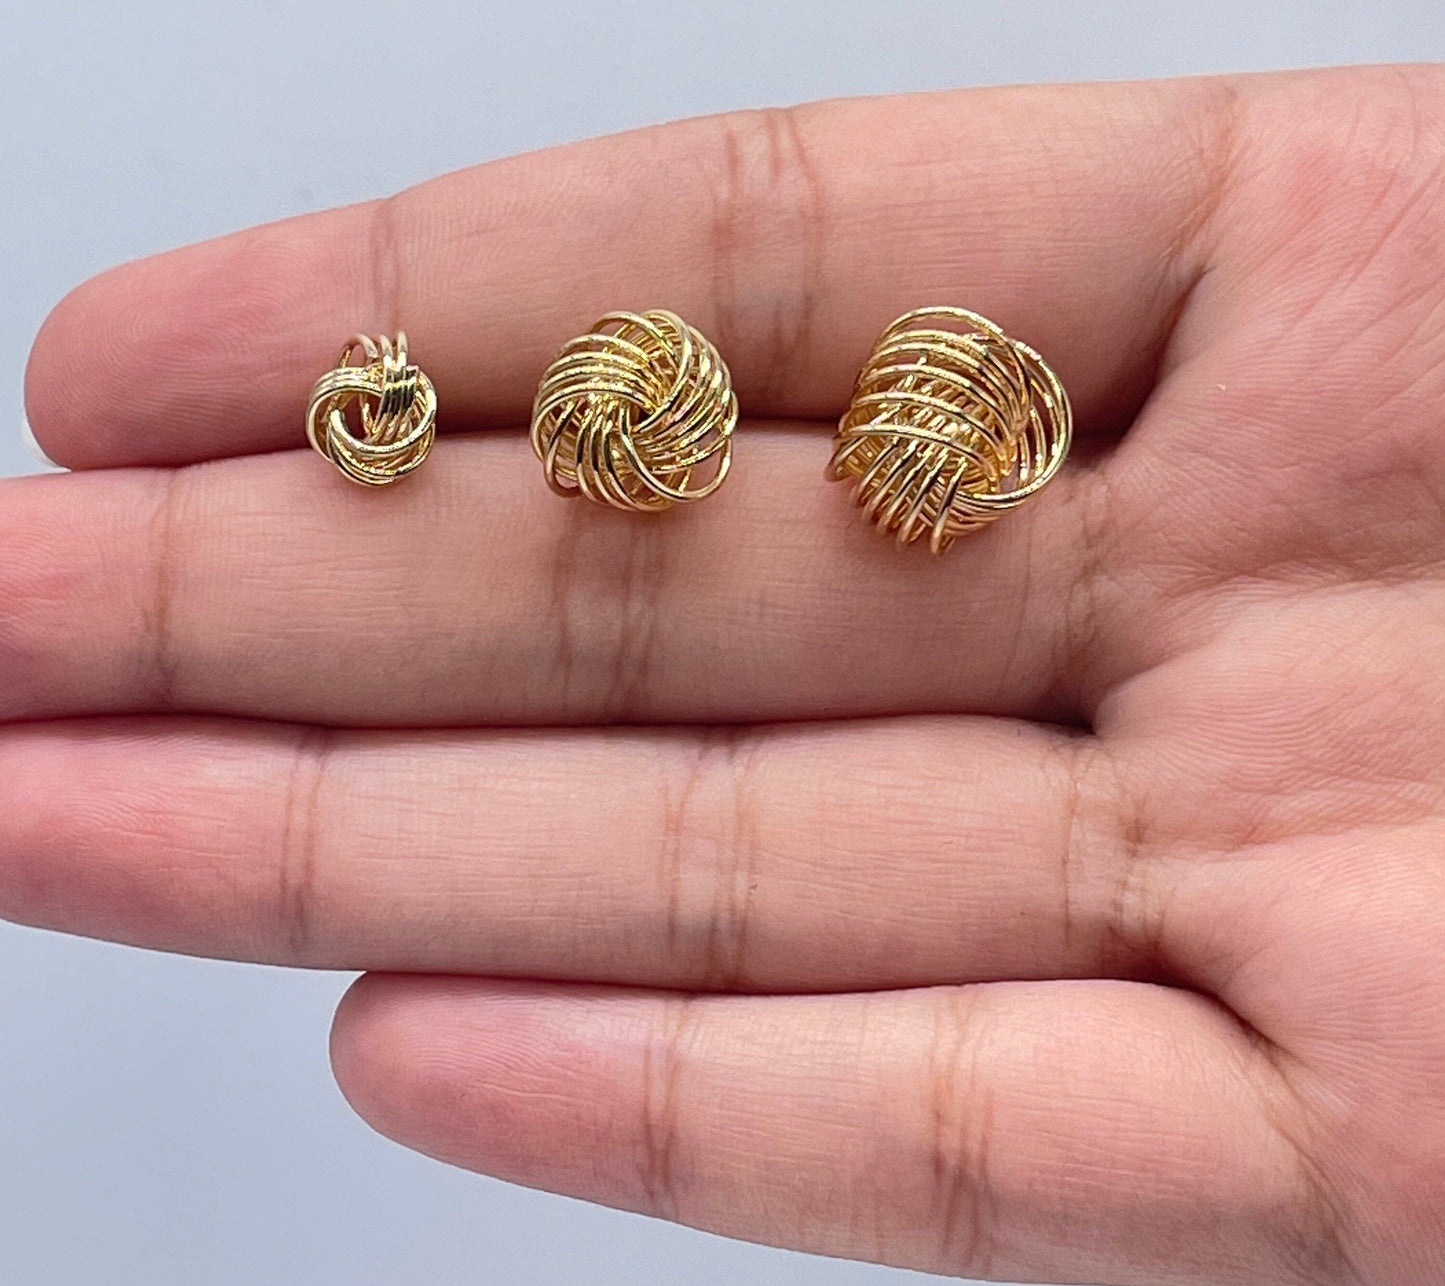 18k Gold Layered Love Knot Stud Earrings, Knot Earrings In Gold Thread, Sizes